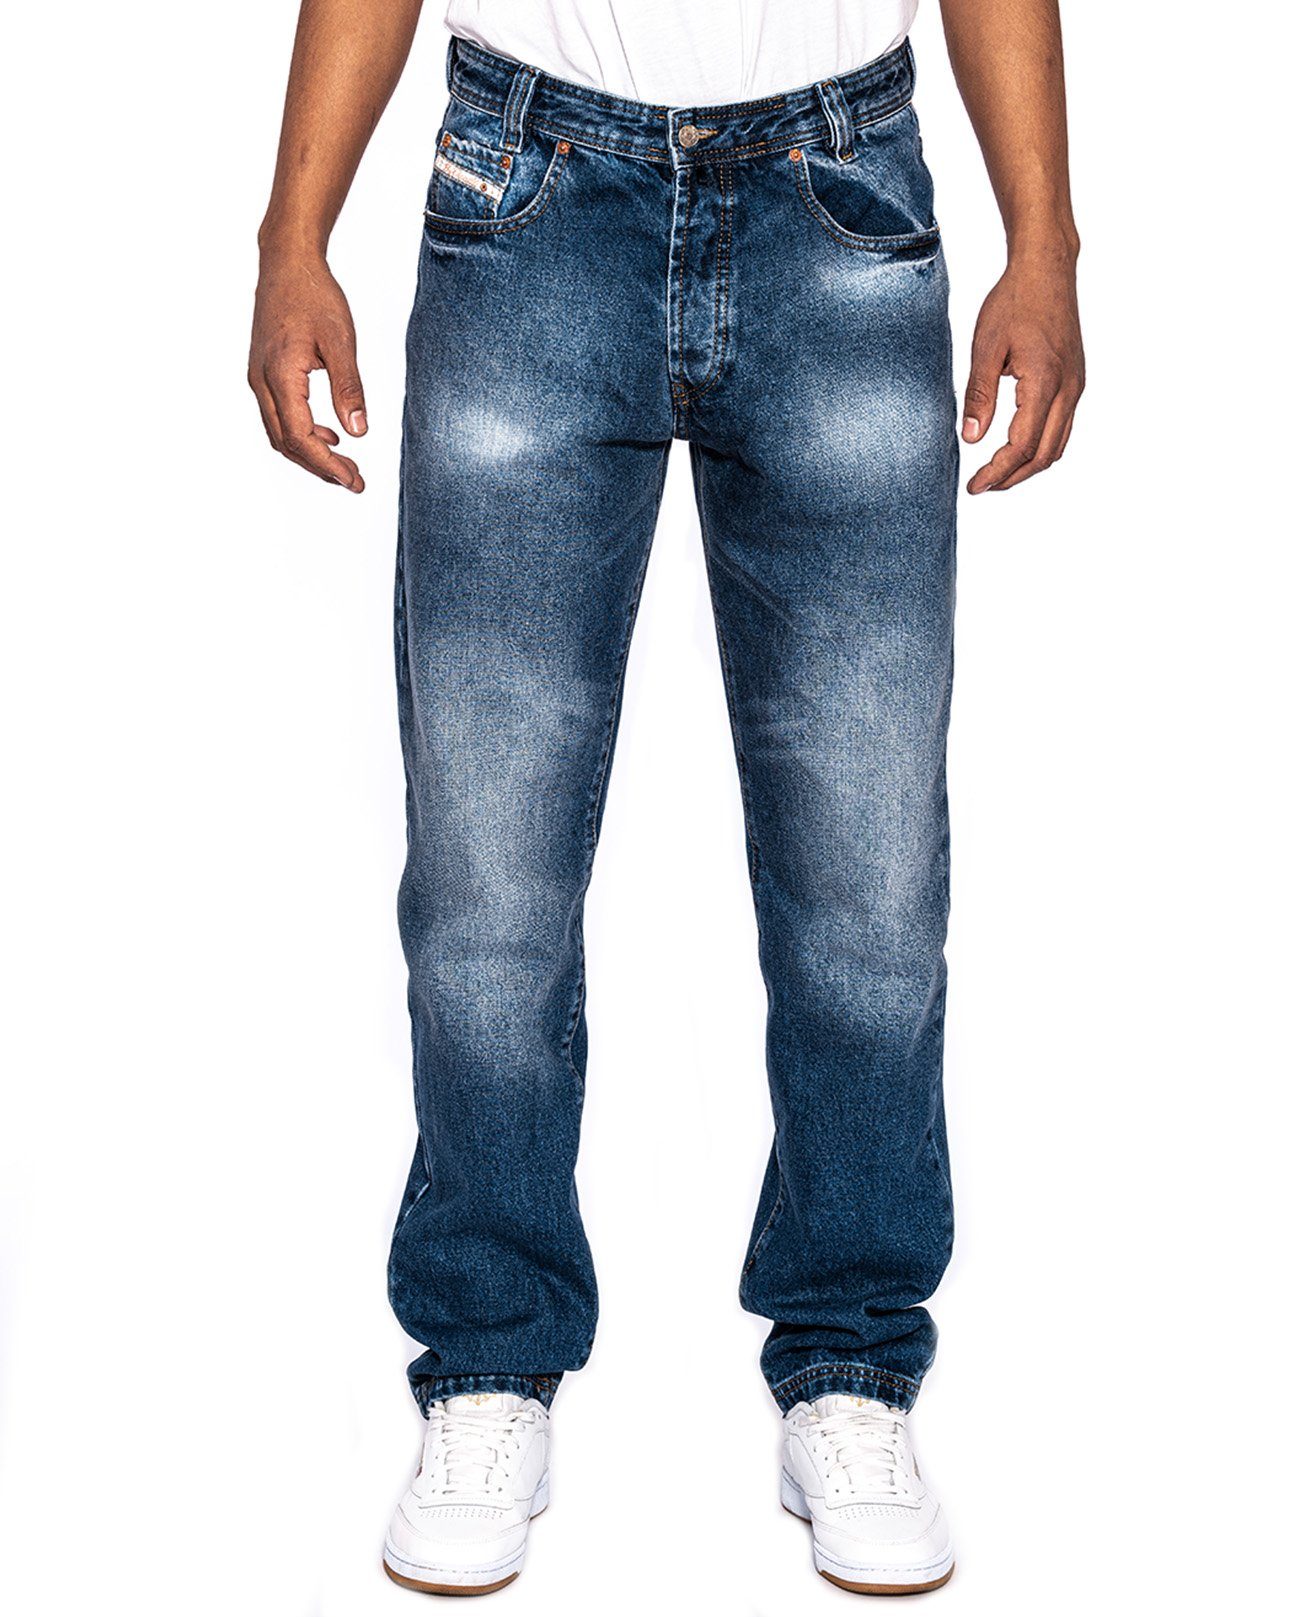 PICALDI Jeans Tapered-fit-Jeans Zicco 473 Jackpot Relaxed Fit, Regular Fit